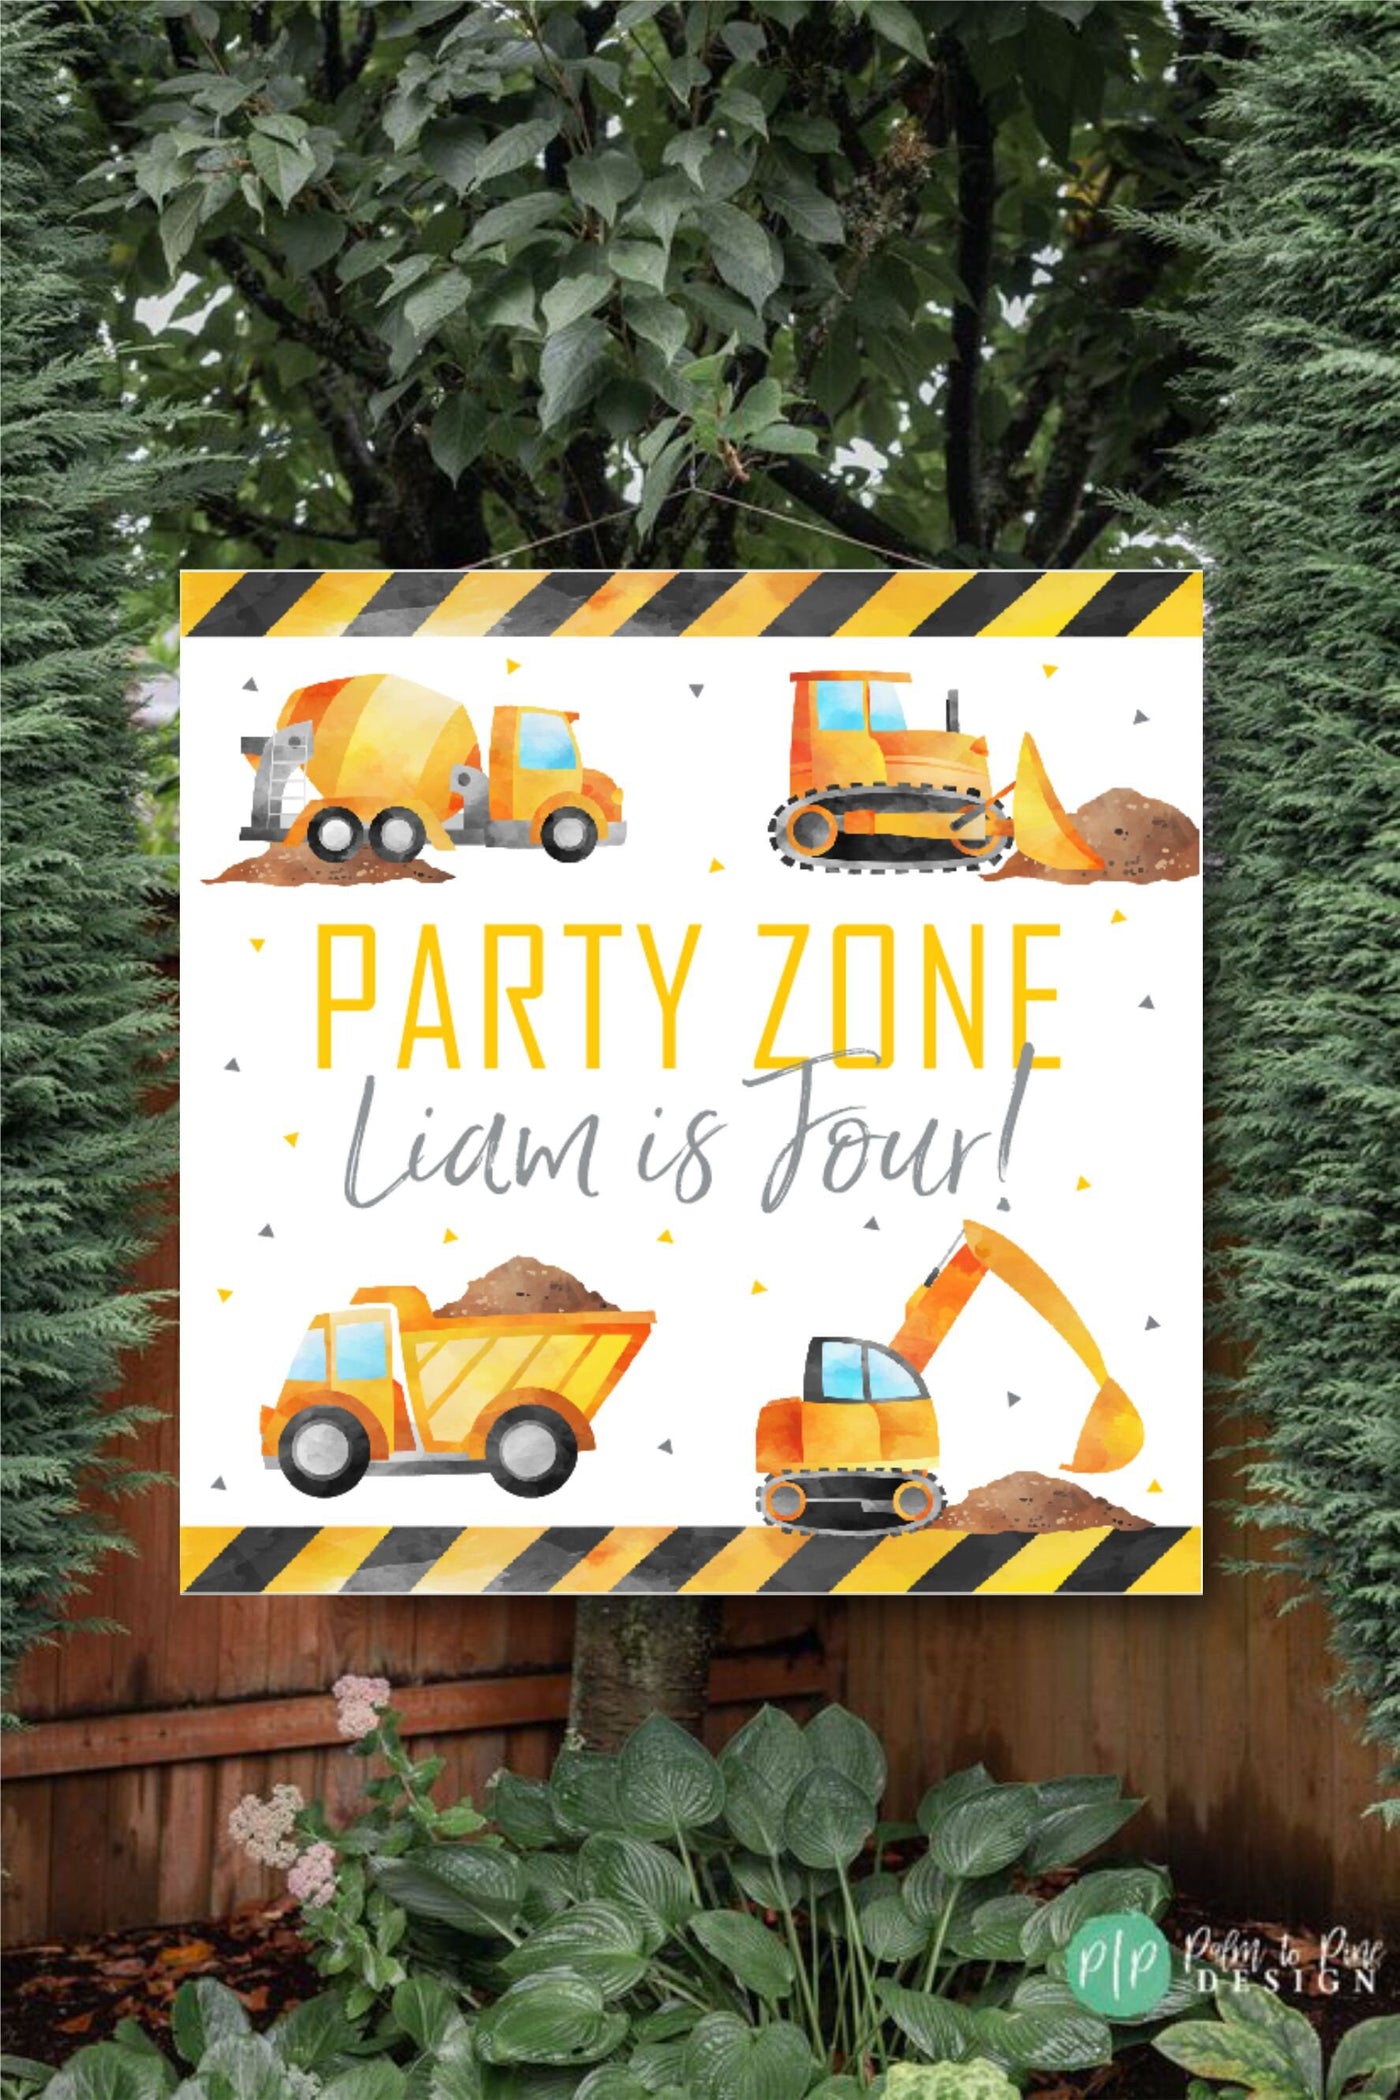 Construction Personalized Banner, Construction Birthday Banner, Boys Construction Birthday Backdrop, Custom Boys Construction Birthday Decor